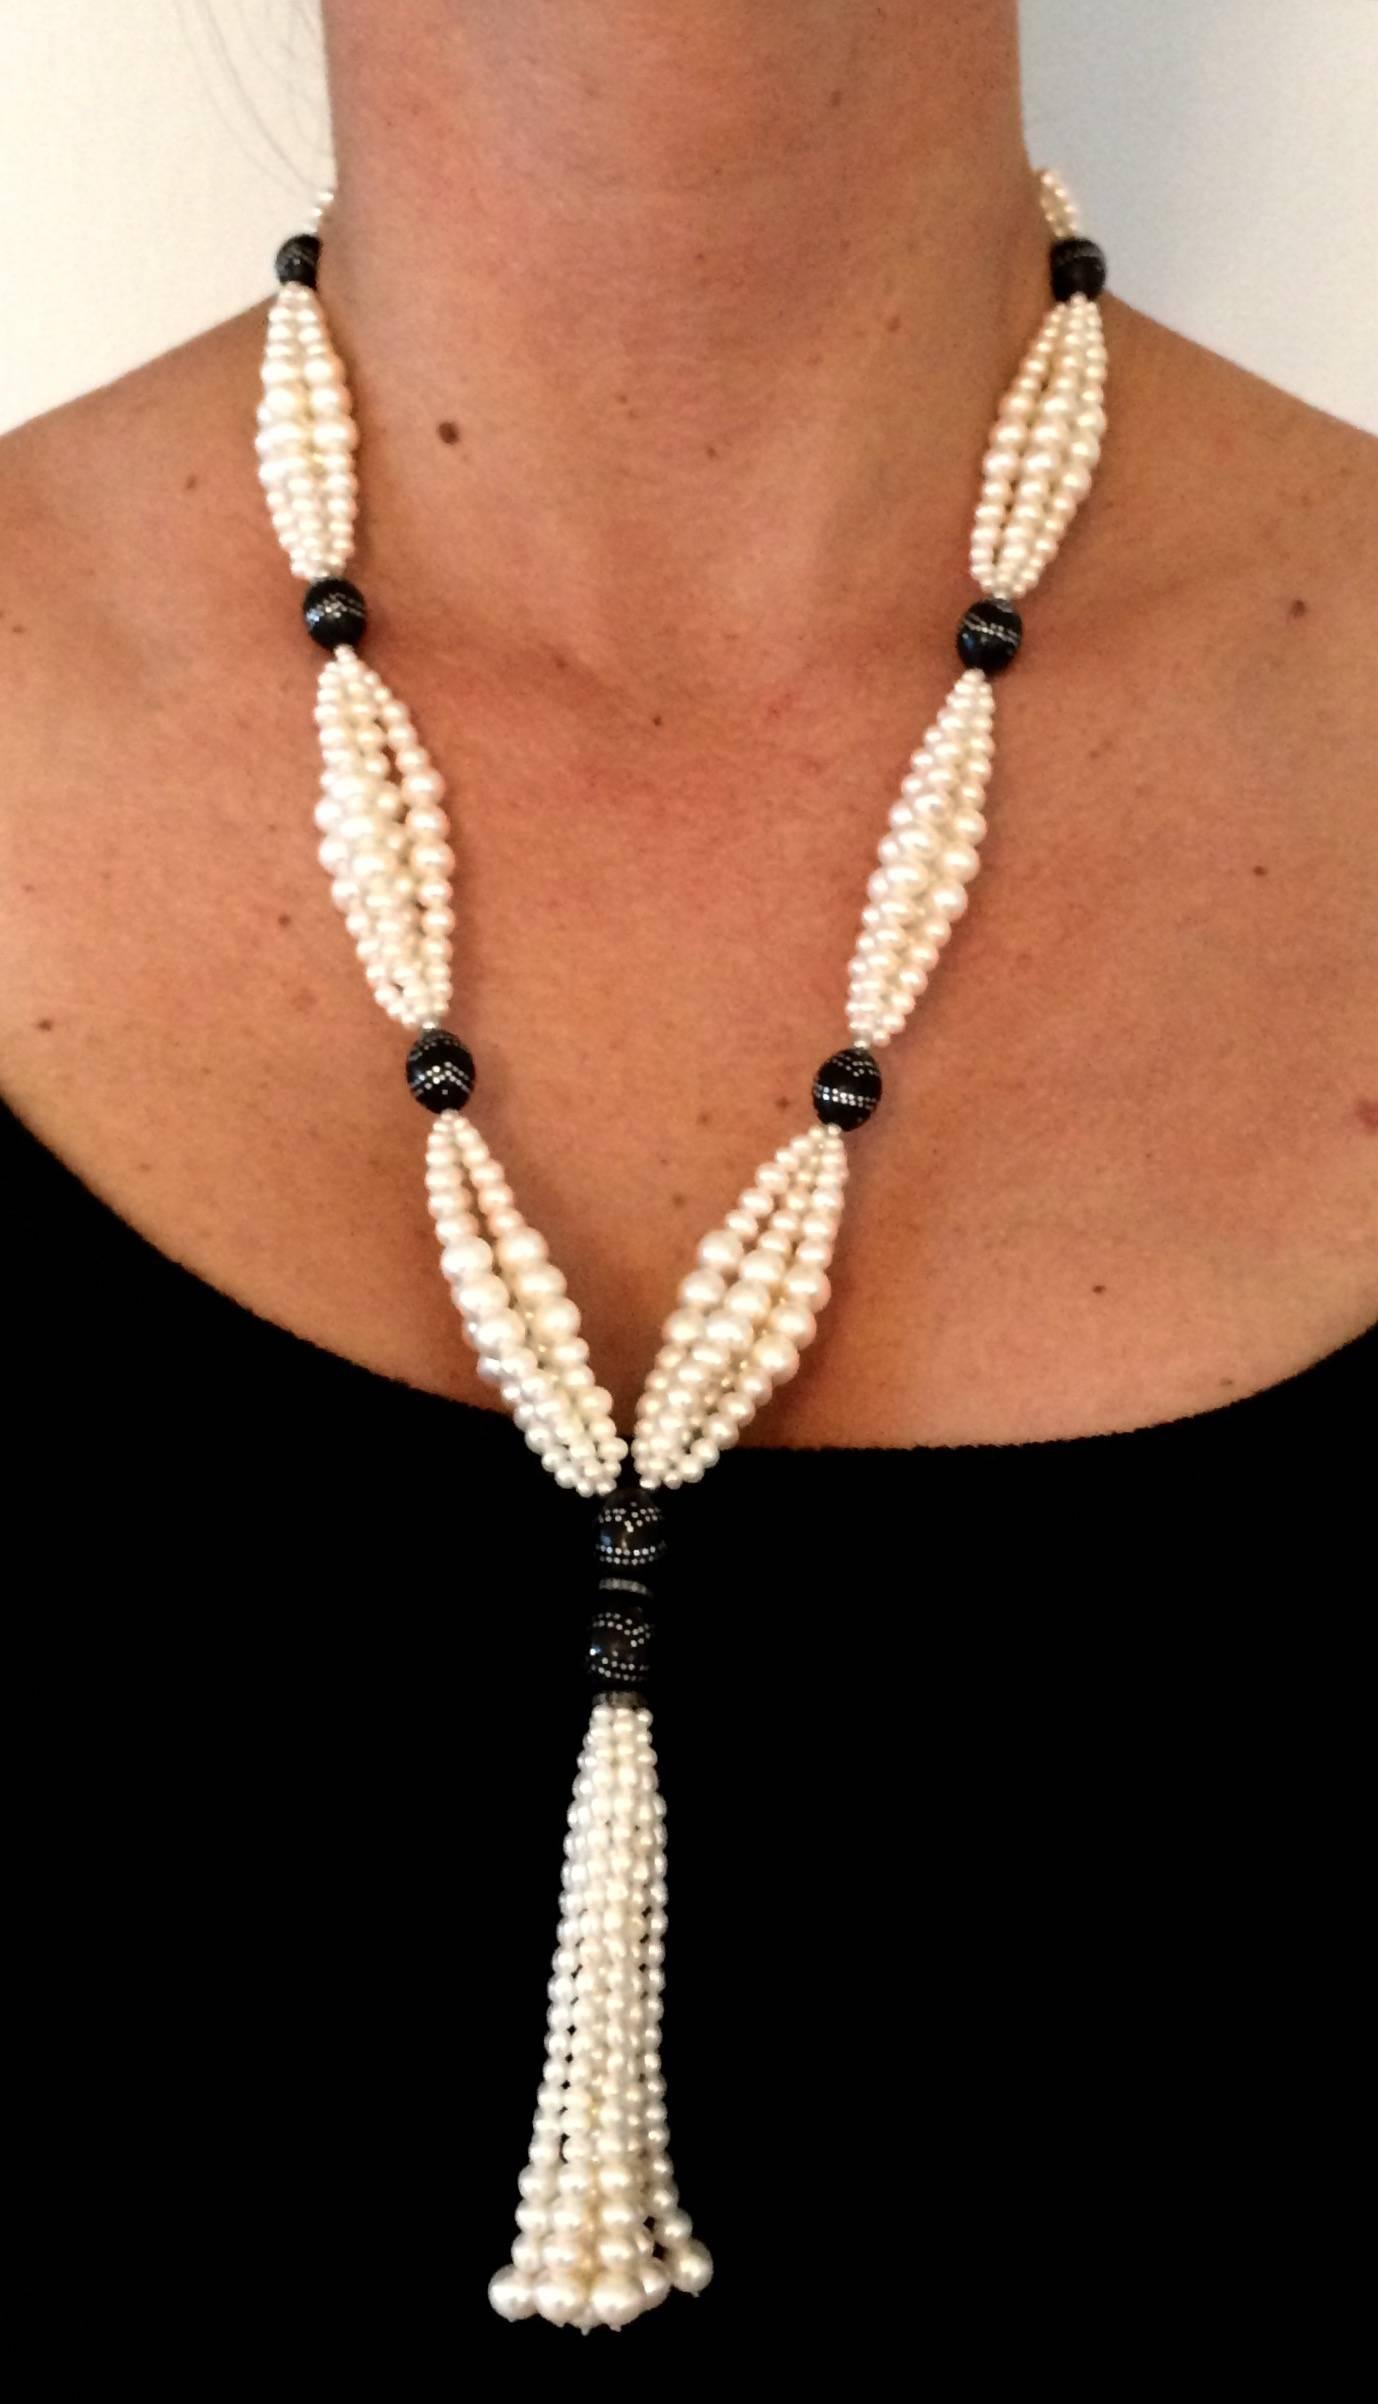 This elegant sautoir features double graduated white pearl clusters strung between  wooded beads detailed with silver inlay. The contrast between the white pearls and the dark wood beads is highlighted by fine 14 k white gold beads.  Tassel measures